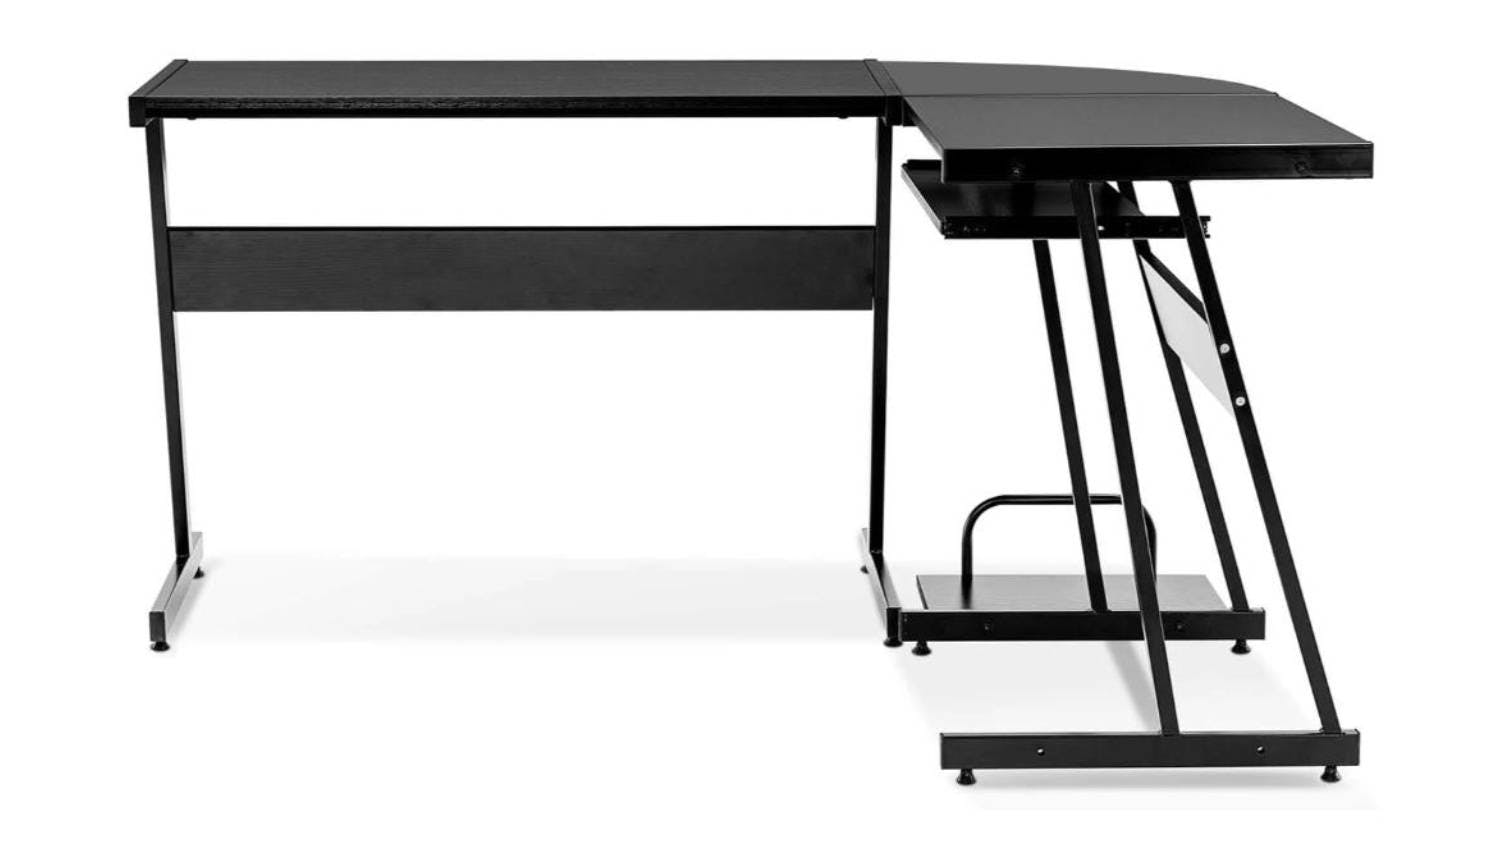 TSB Living L-Shaped Metal Frame Desk with PC Tower Stand, Keyboard Tray